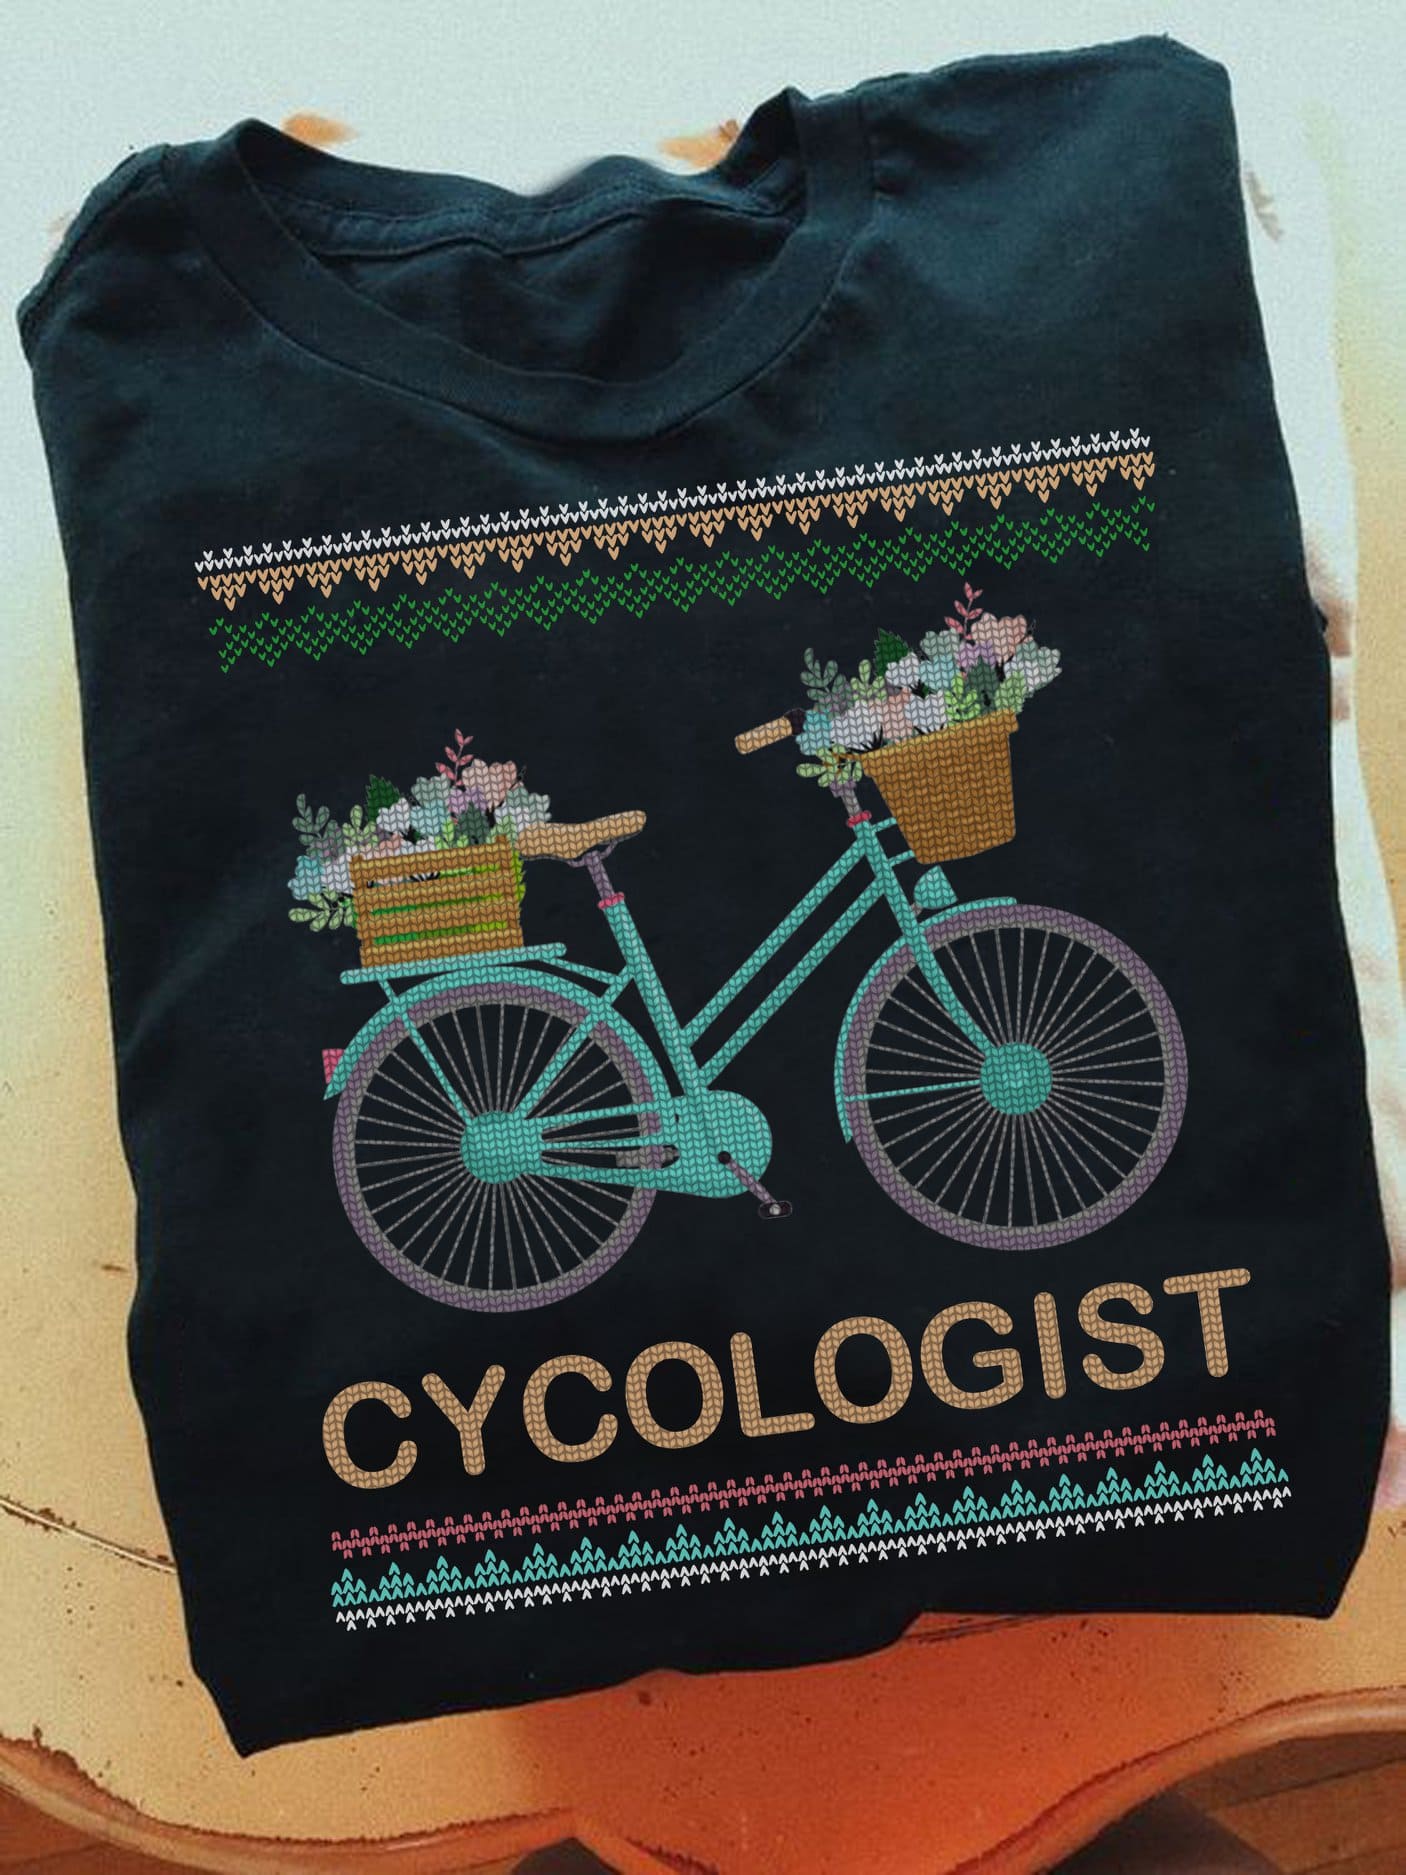 Cycologist T-shirt - Gift for biker, flower on bicycle